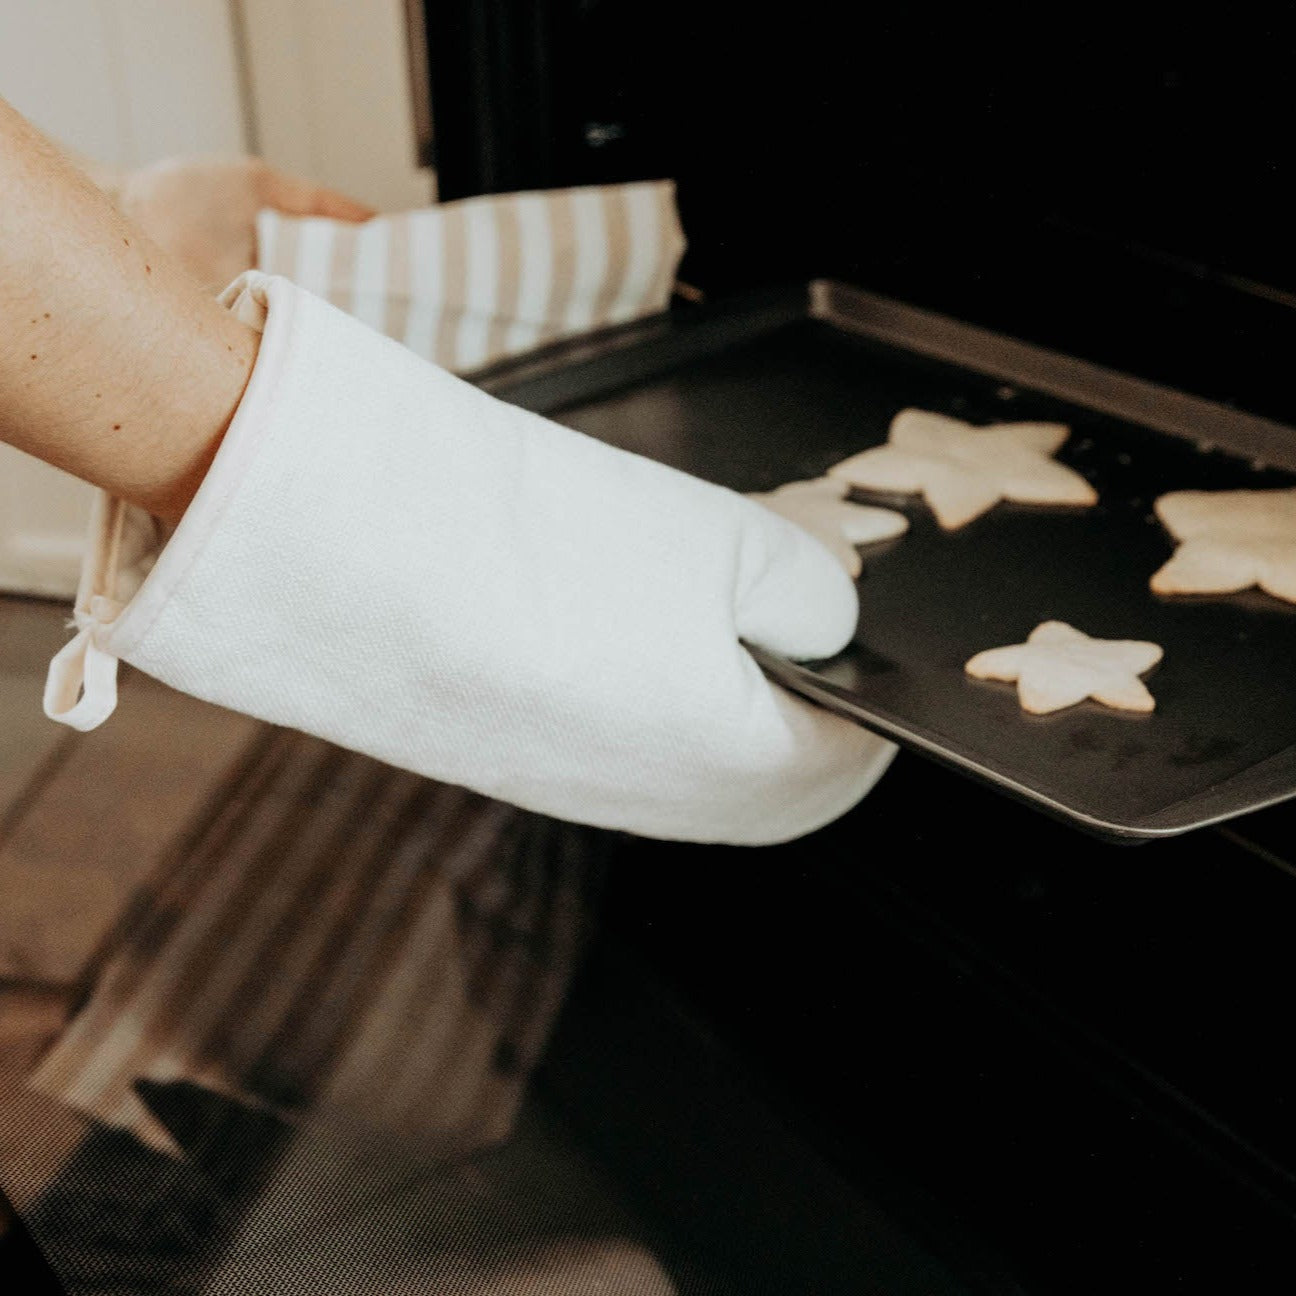 Oven mitt on hand as person takes tray of cookies out of the oven.